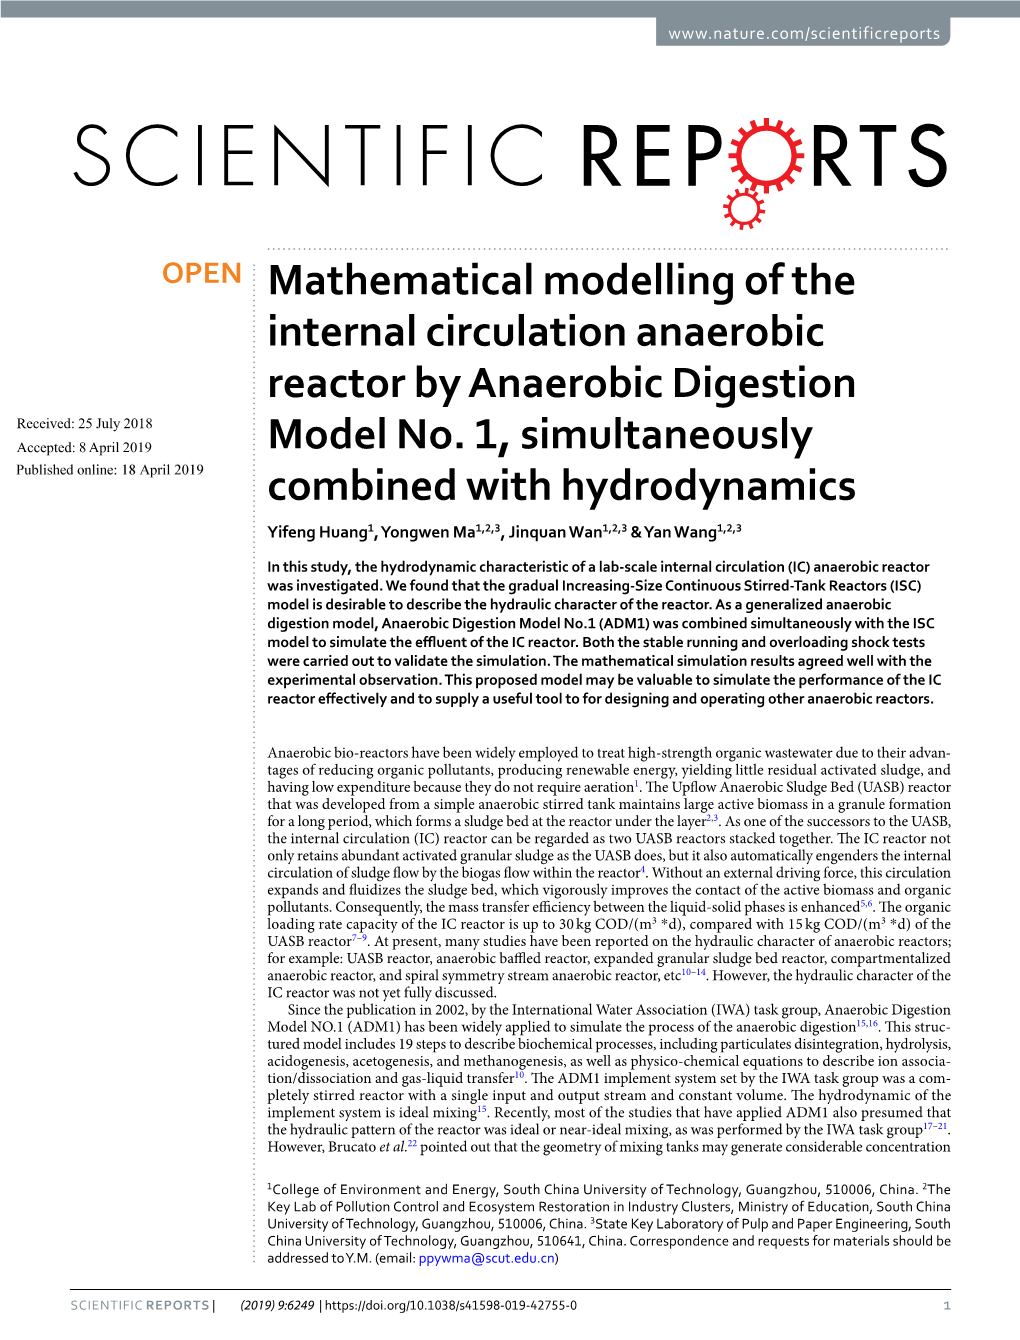 Mathematical Modelling of the Internal Circulation Anaerobic Reactor by Anaerobic Digestion Received: 25 July 2018 Accepted: 8 April 2019 Model No